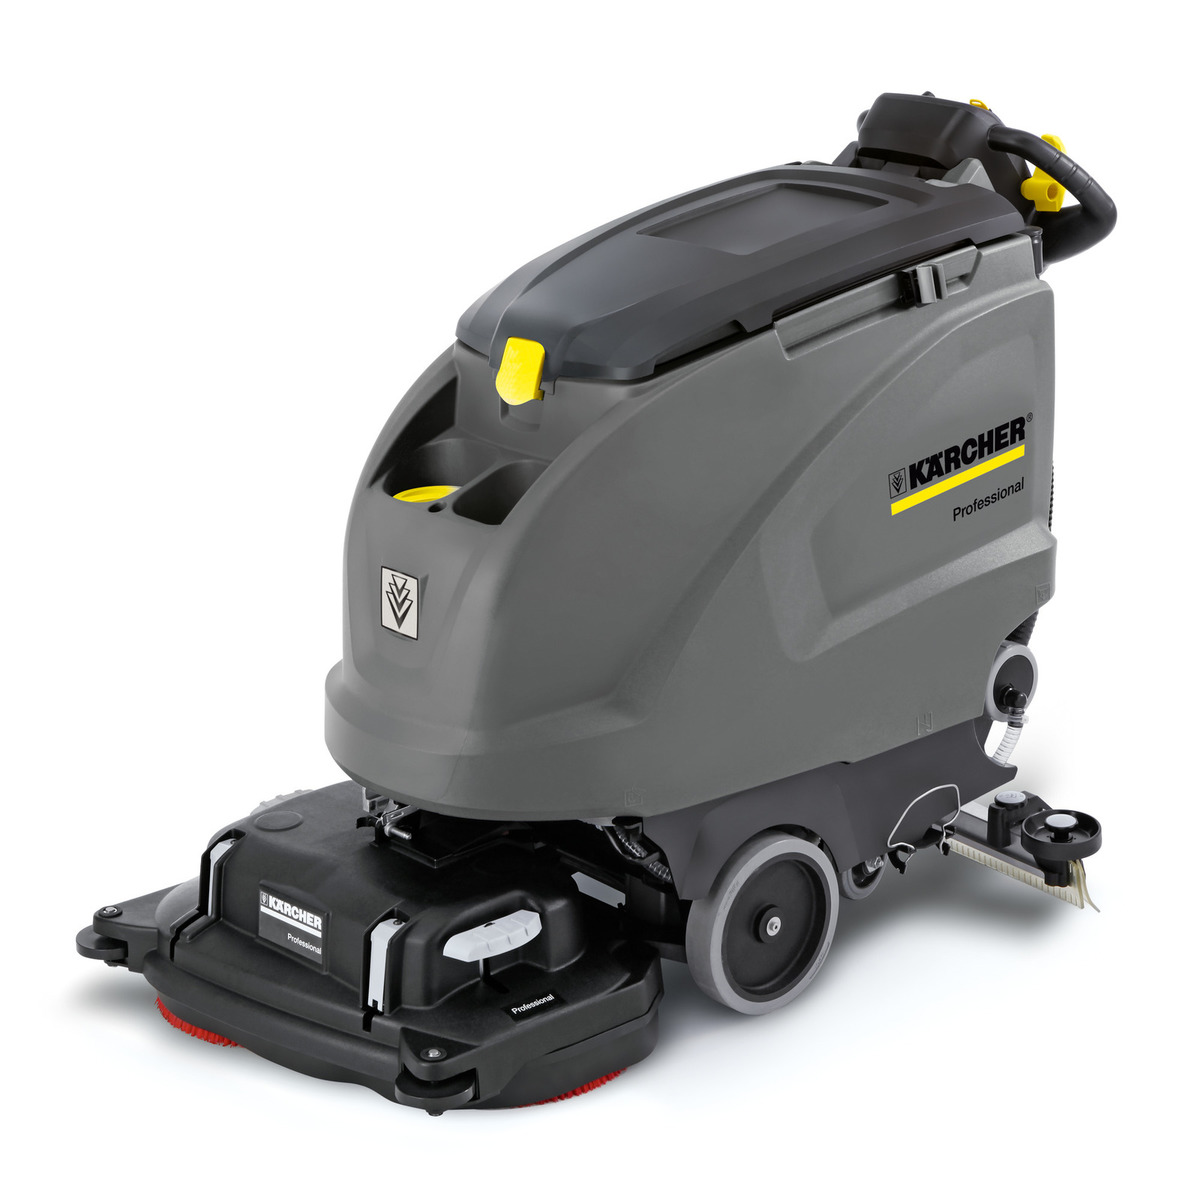 Karcher B 60 W Bp Walk-Behind Auto Scrubber karcher, b, 60, bp, walk-behind, commercial, auto, floor, scrubber, automatic, auto-scrubber, cleaning, machine, professional, janitorial, industrial, equipment, 